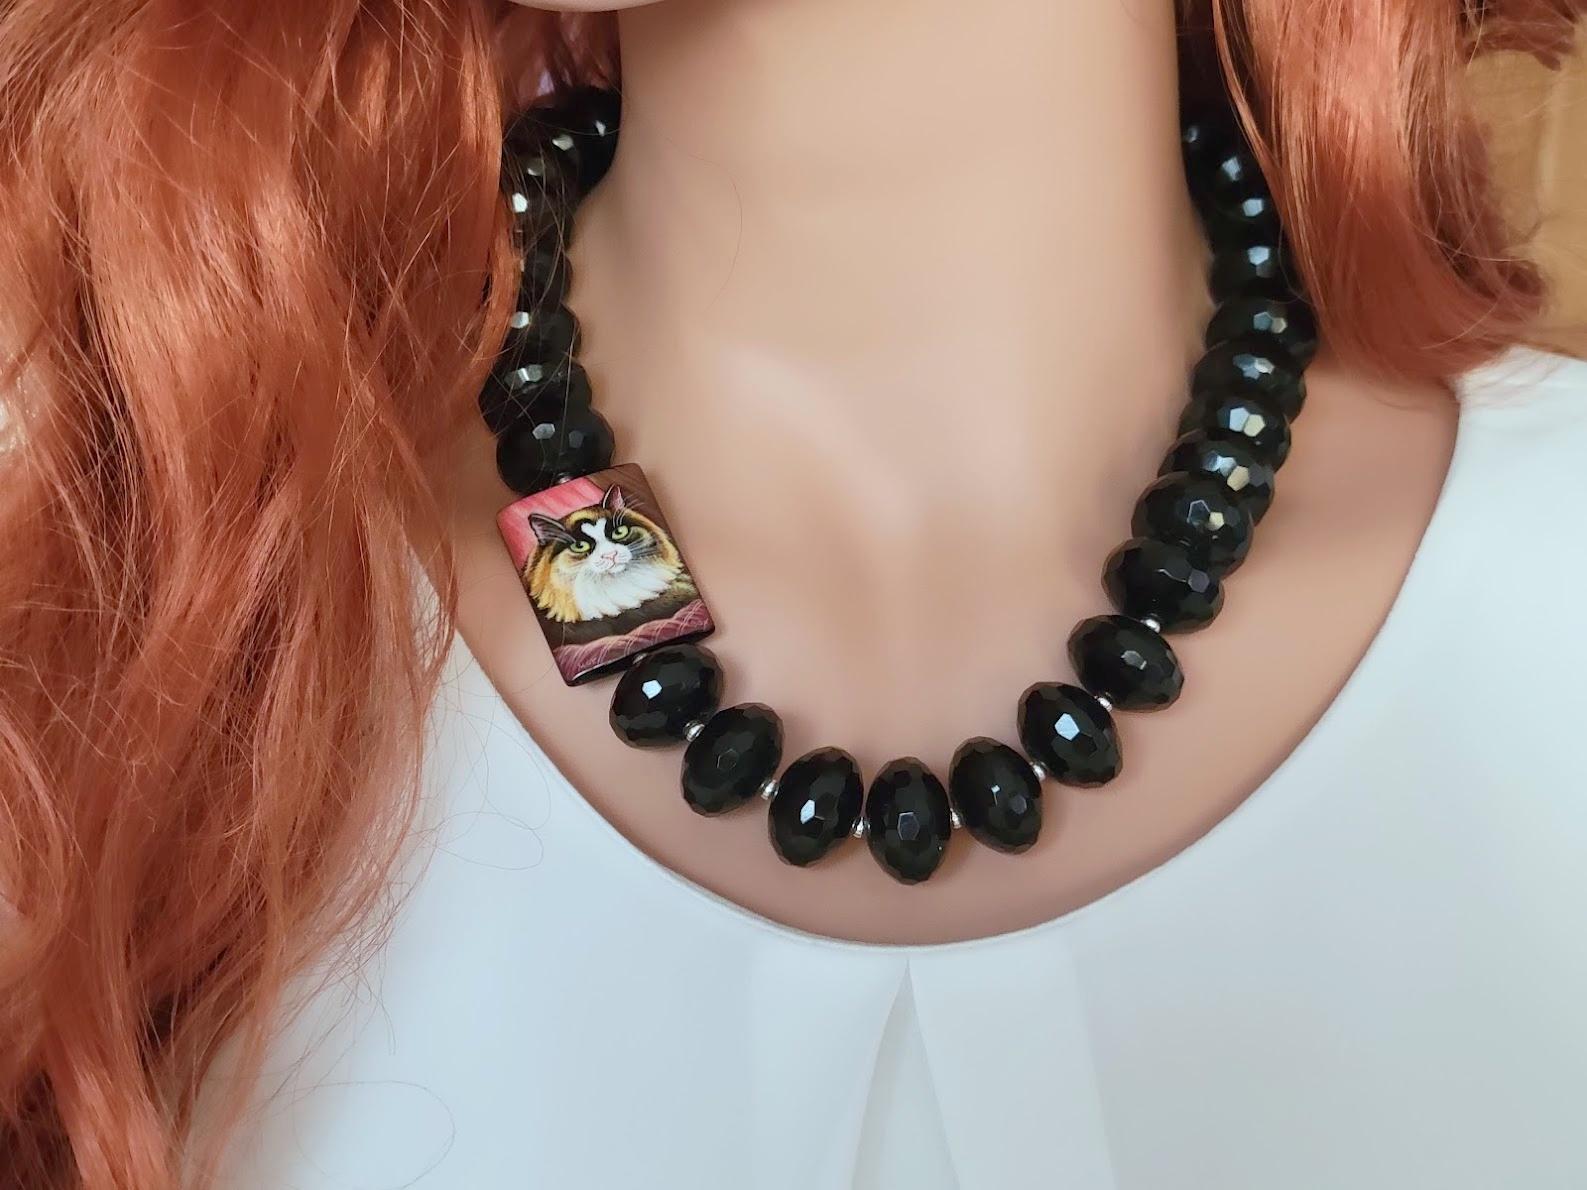 Black Onyx Necklace With Hand Painted Bead On Black Rectangular Agate In Excellent Condition For Sale In Chesterland, OH